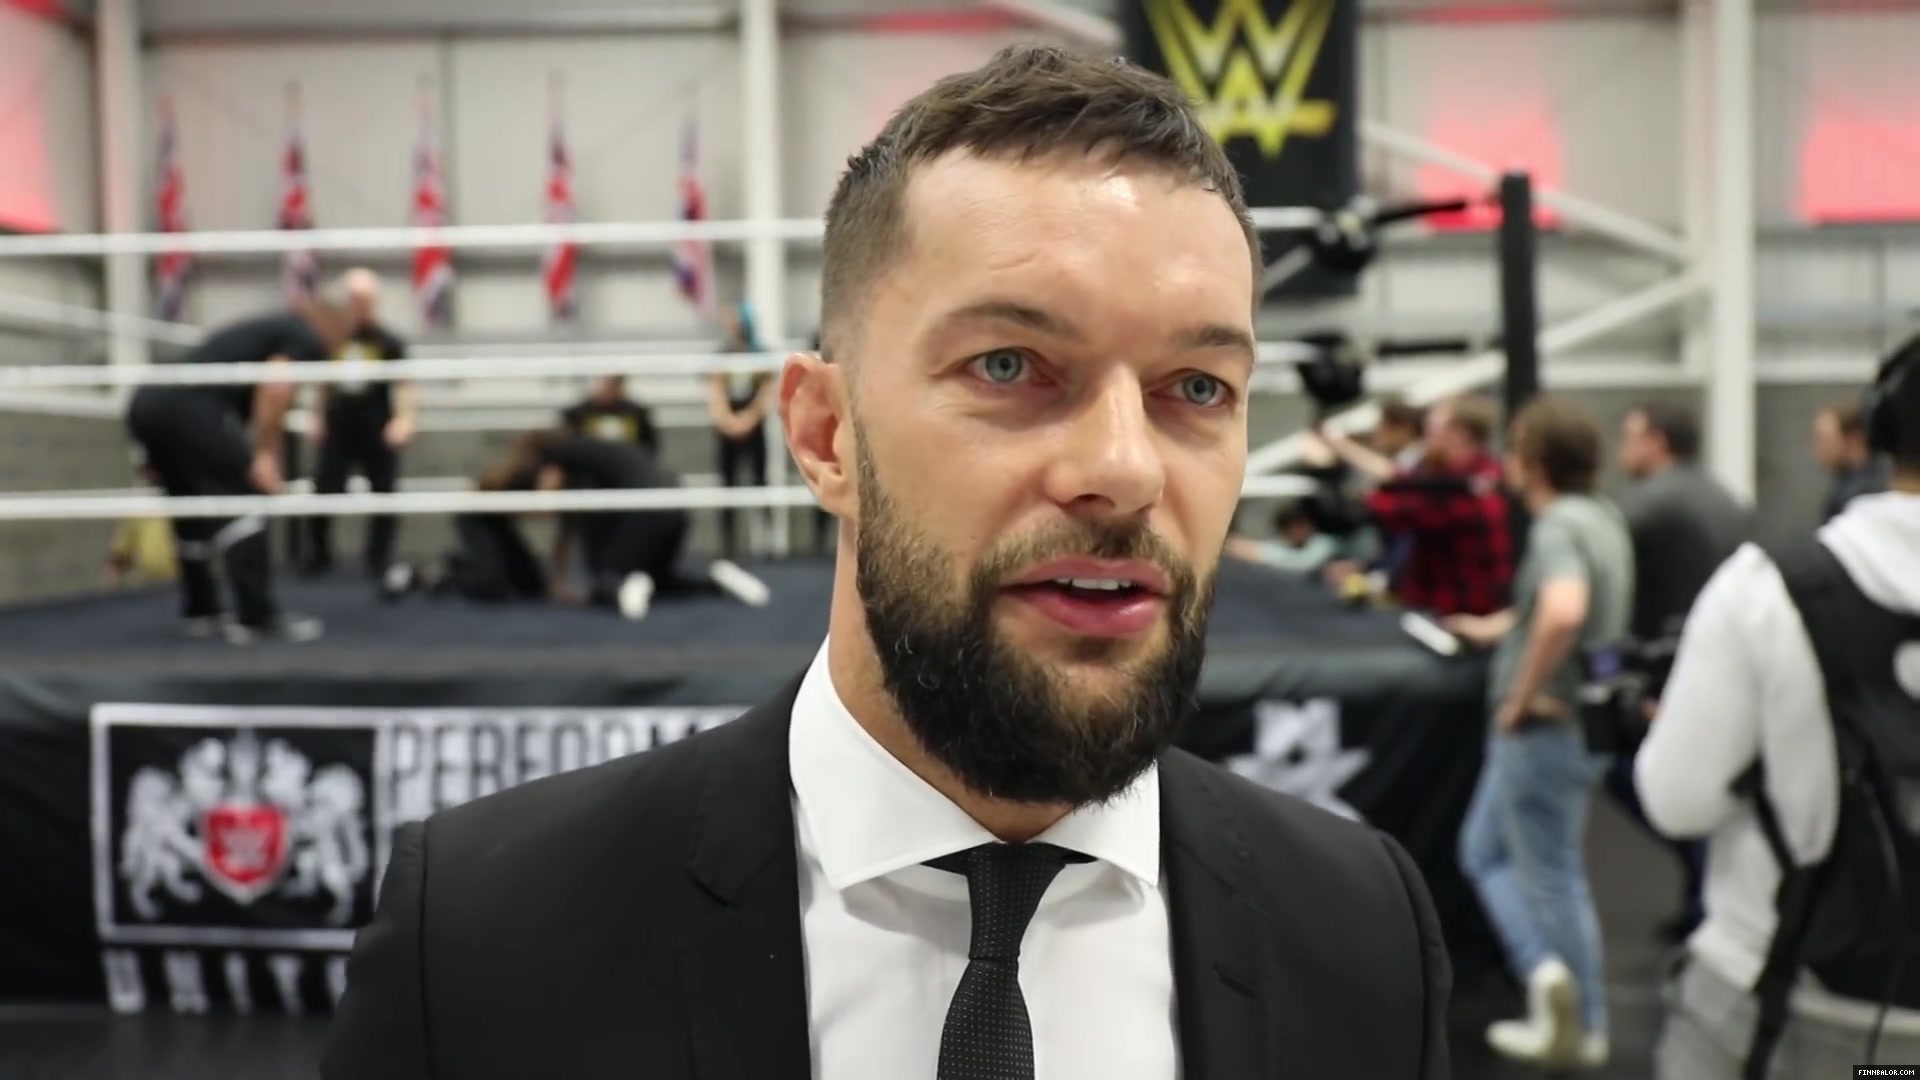 WWE_Superstar_FINN_BALOR_joins_MOUSTACHE_MOUNTAIN_at_the_opening_of_the_NXT_UK_PC_137.jpg